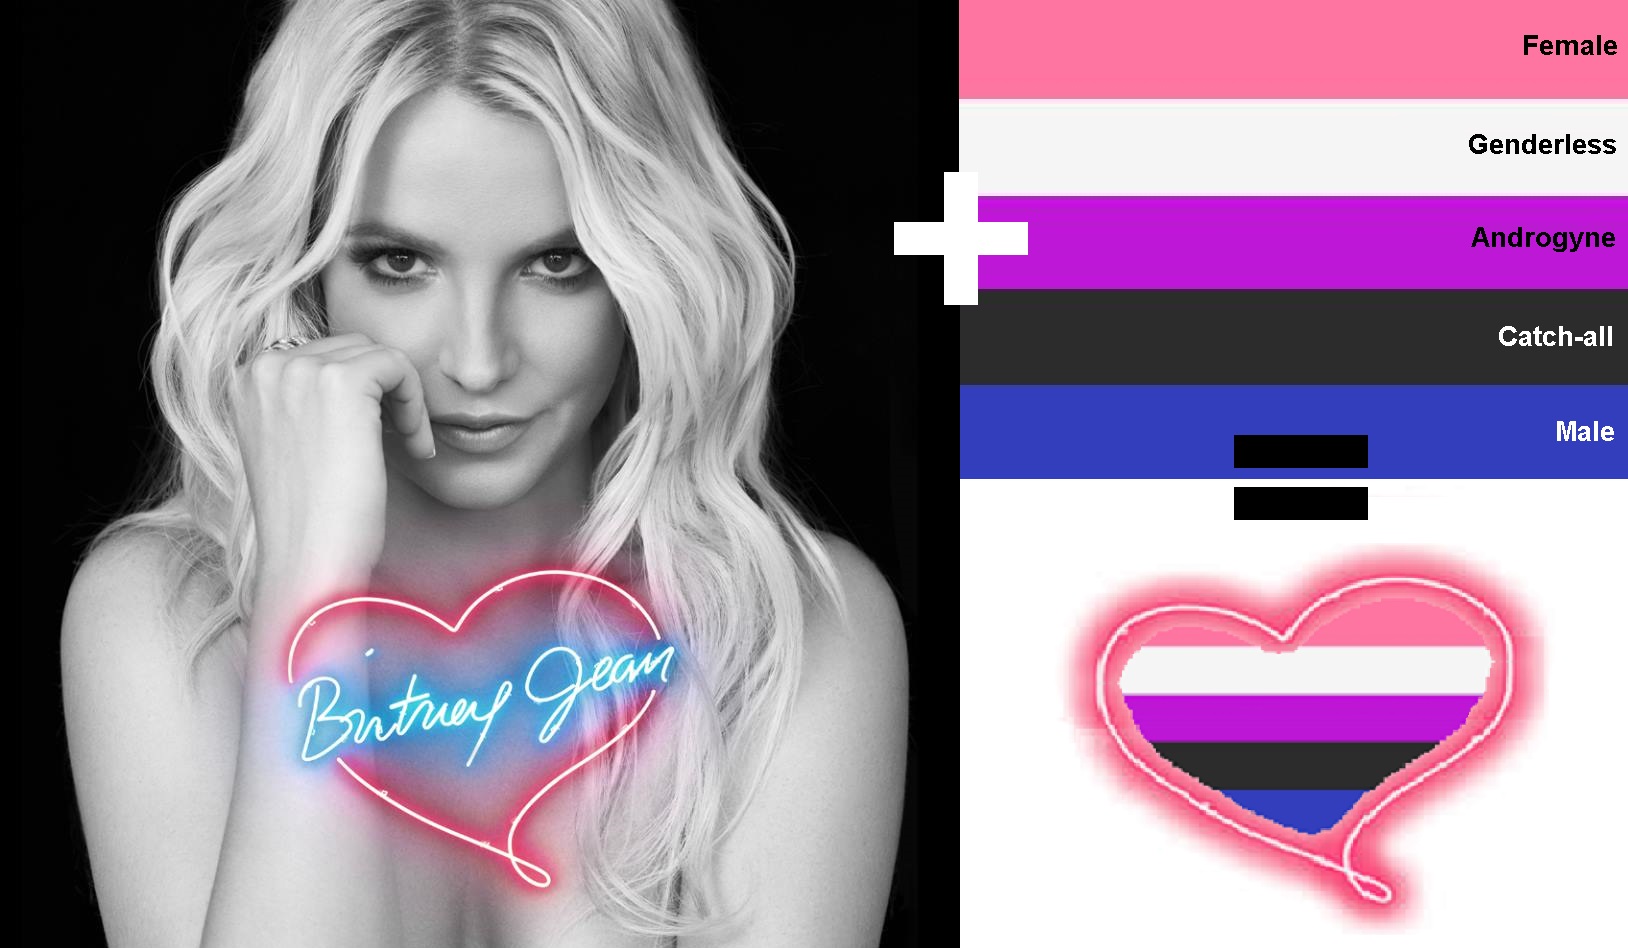 The album cover from Britney Spears's Britney Jean album, plus the genderfluid flag, equals the genderfluid flag inside of the heart from that album cover